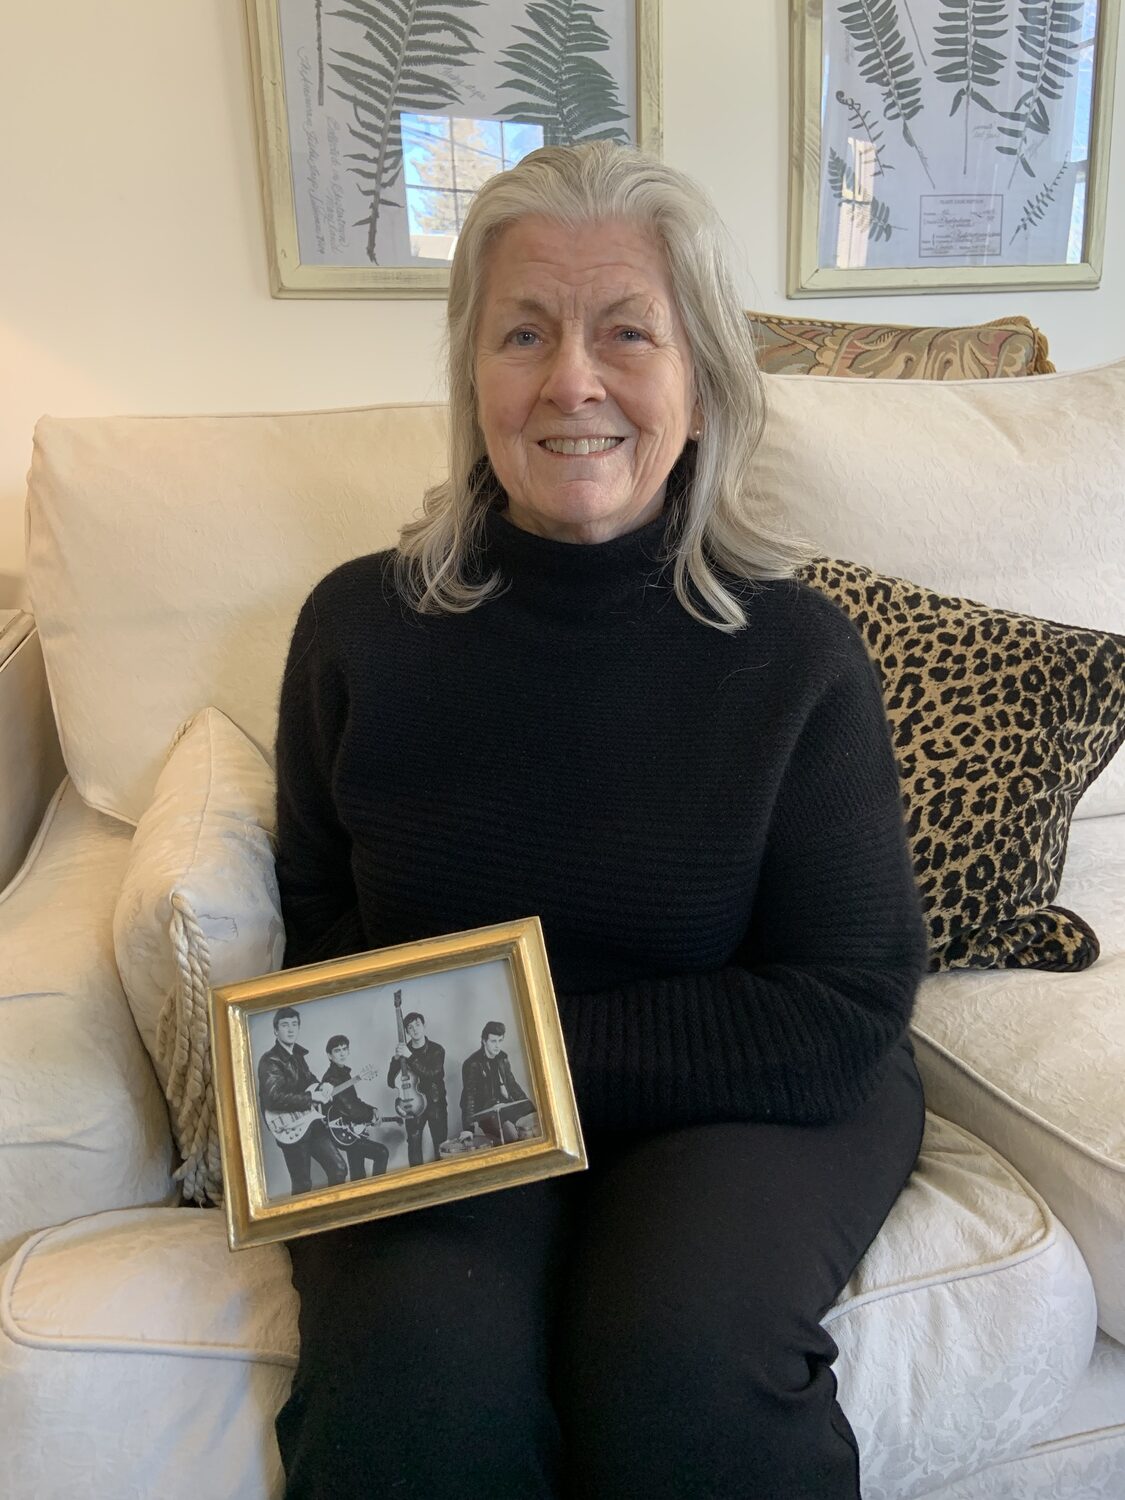 Hilary Collins of Sag Harbor, who grew up in Liverpool, had a front row seat on the formation of the Beatles long before Beatlemania swept the world. STEPHEN J. KOTZ